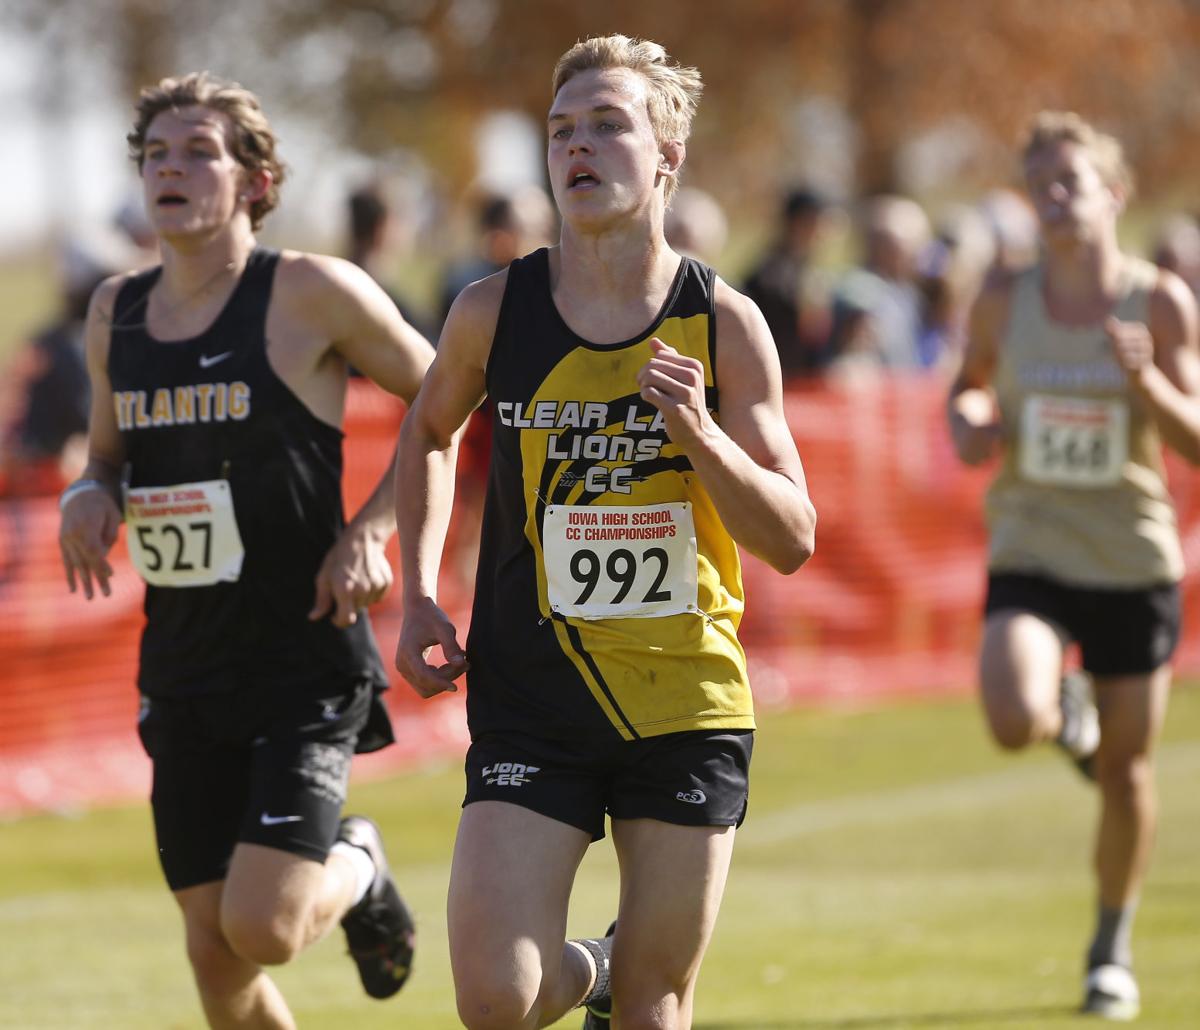 State Cross Country Final state race is the one that counts for GHV's